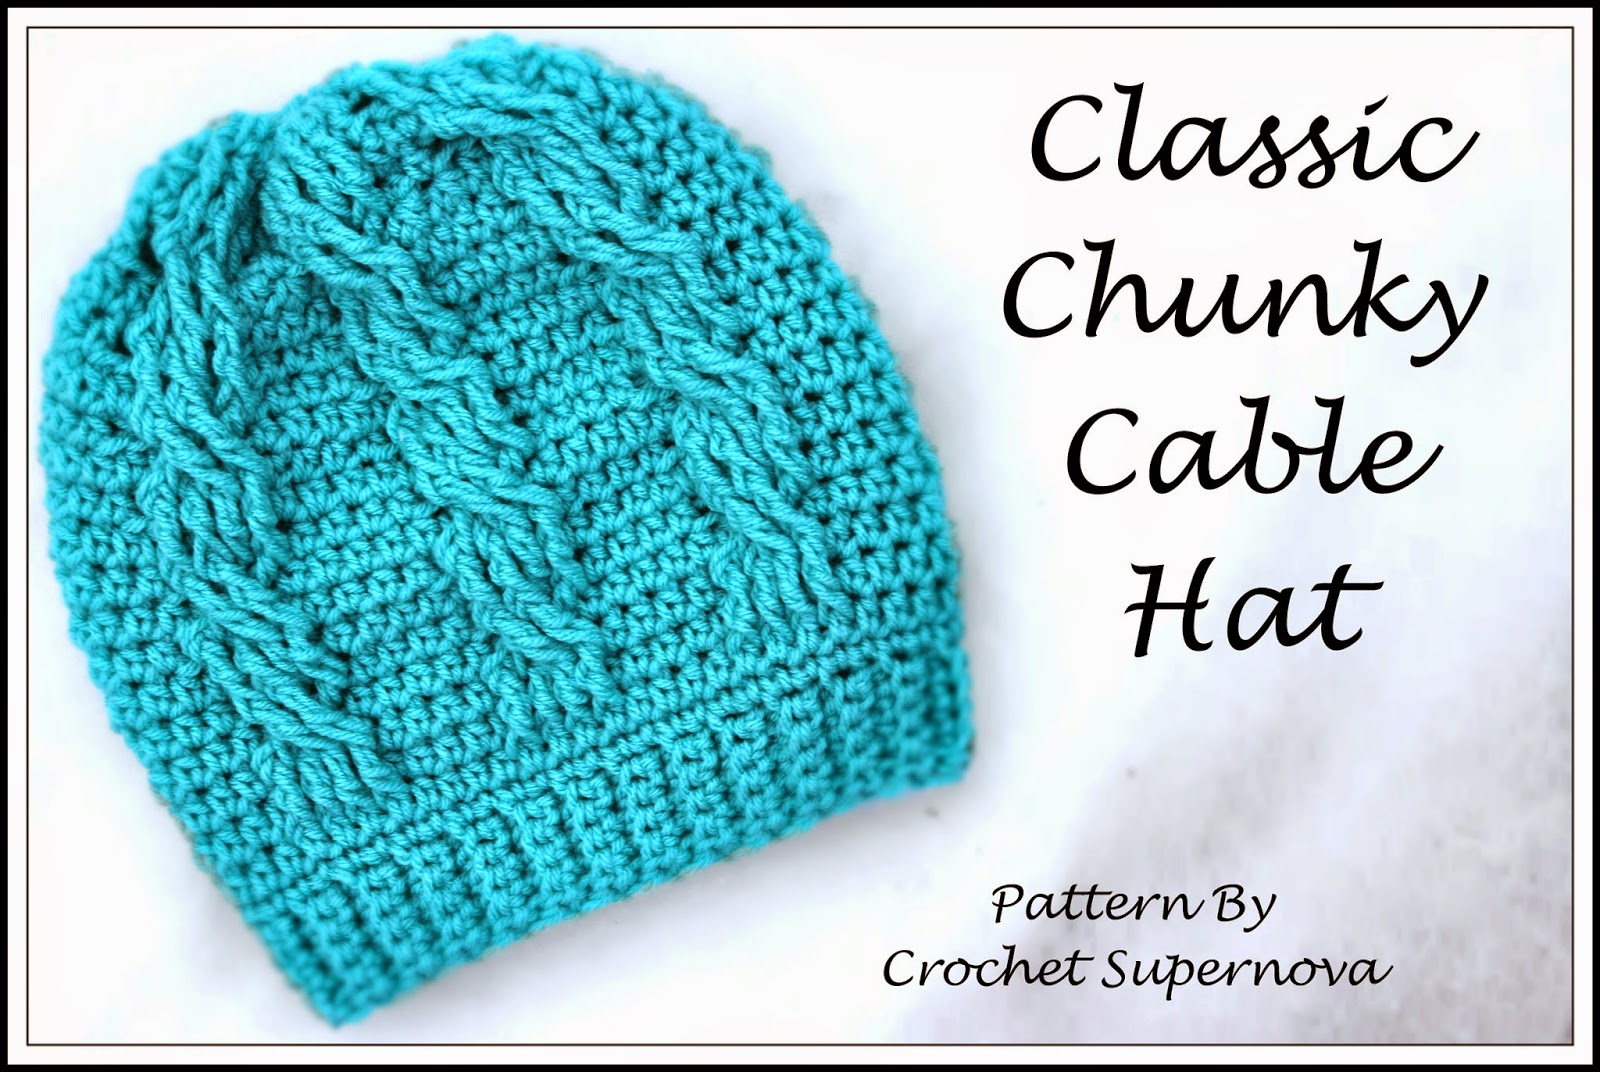 Crochet Supernova Classic Chunky Cable Hat Free Pattern